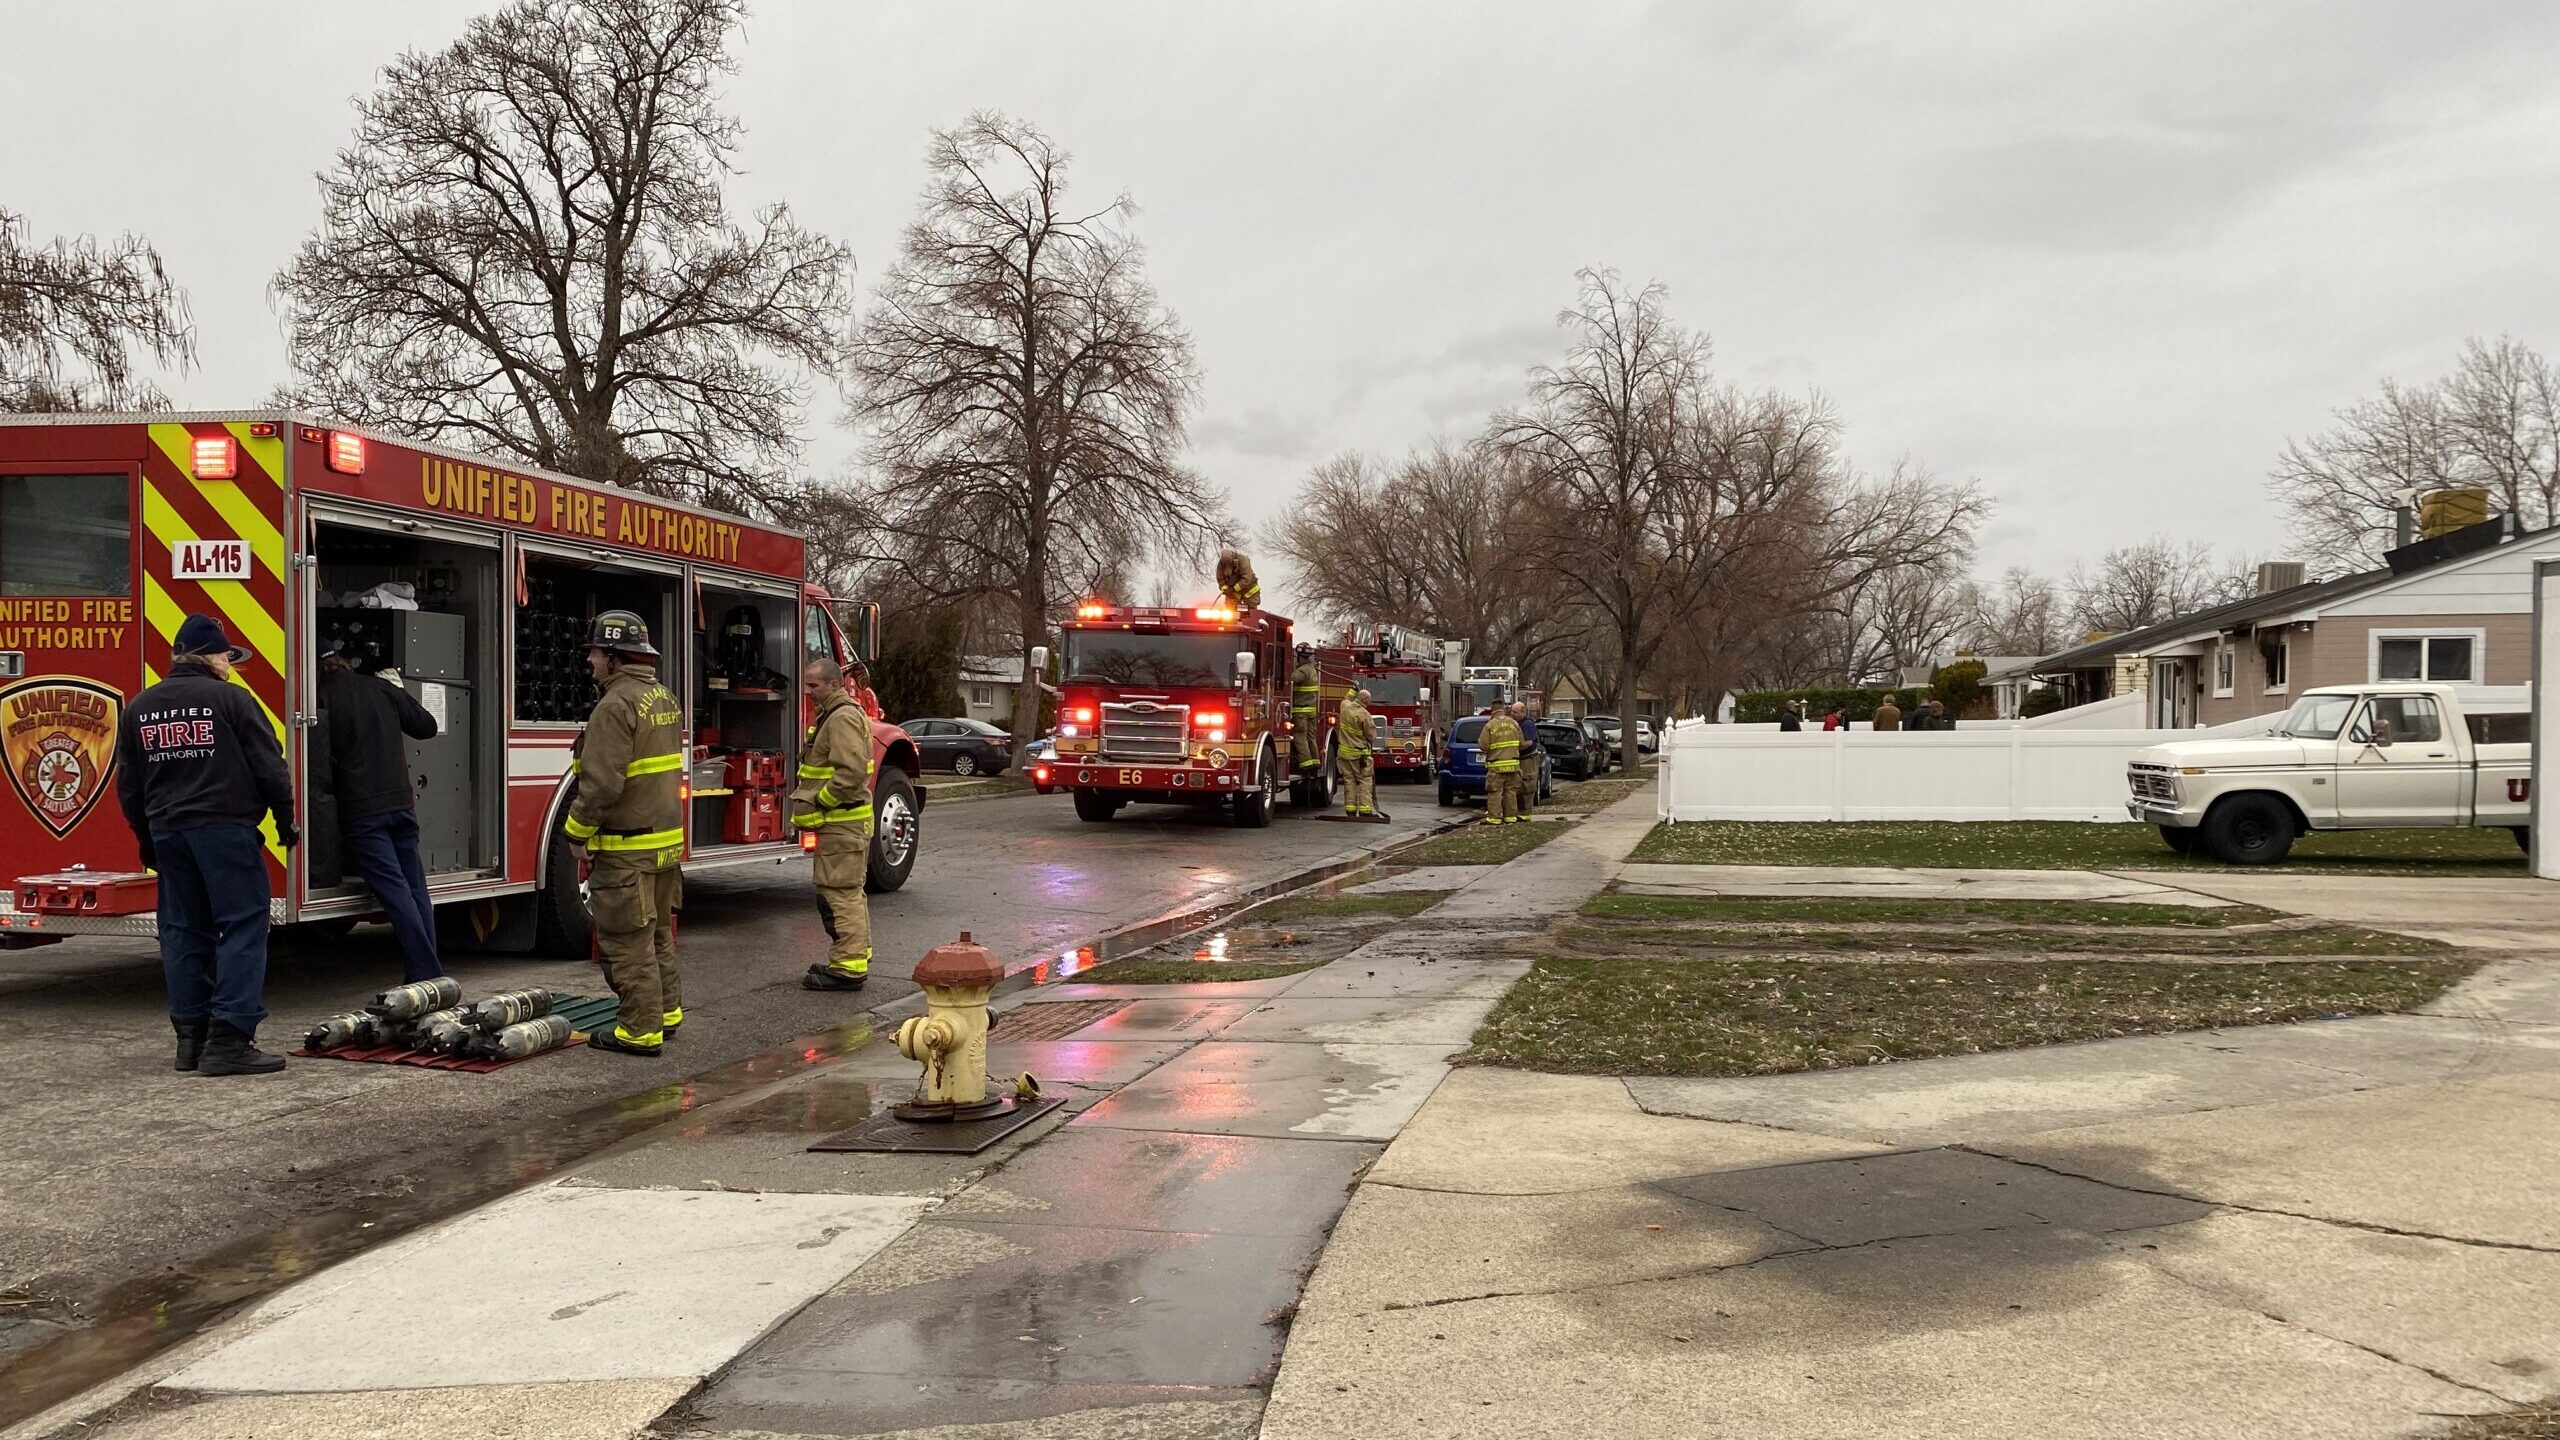 A family of six was displaced following a house fire Tuesday afternoon in Salt Lake City. Photo cre...